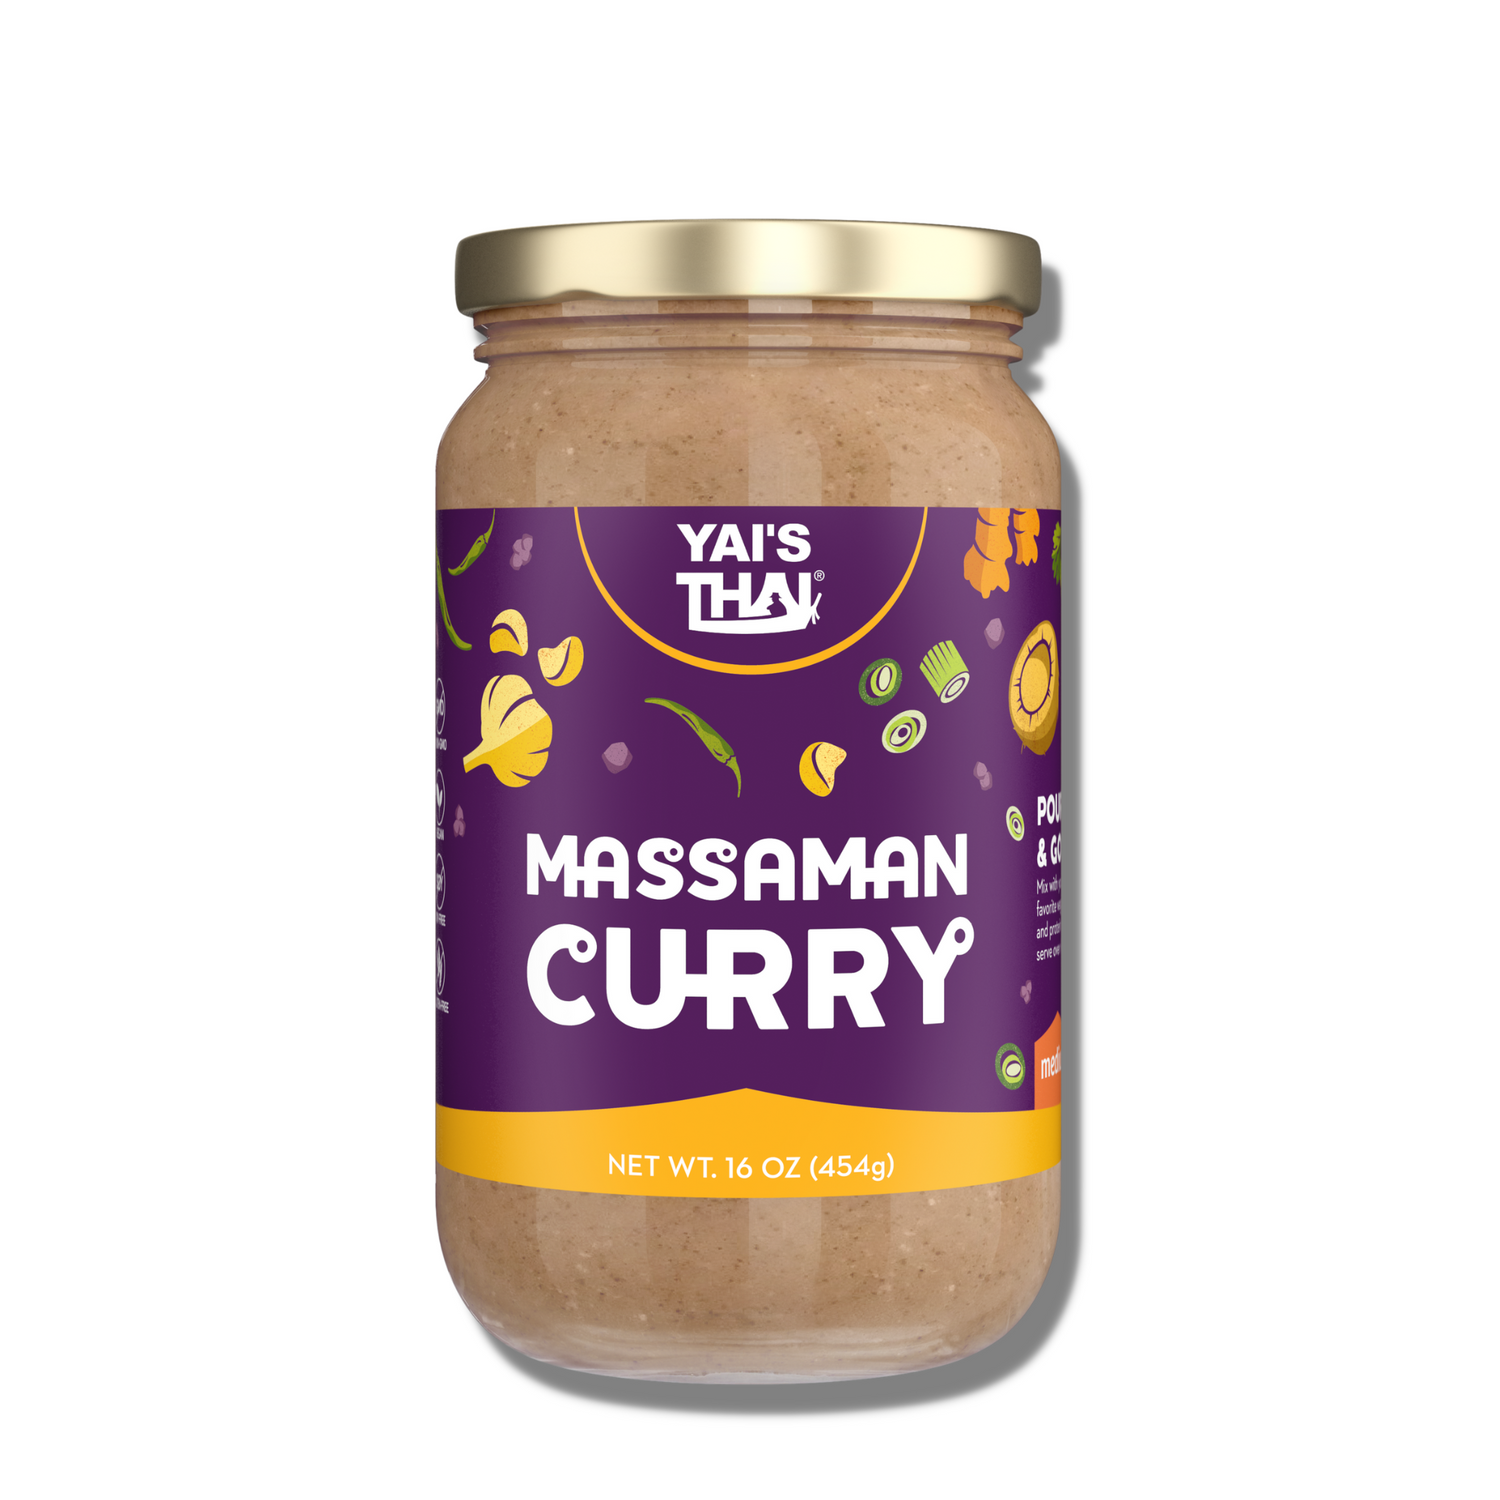 VEGAN CURRIES, SAUCES AND MARINADES